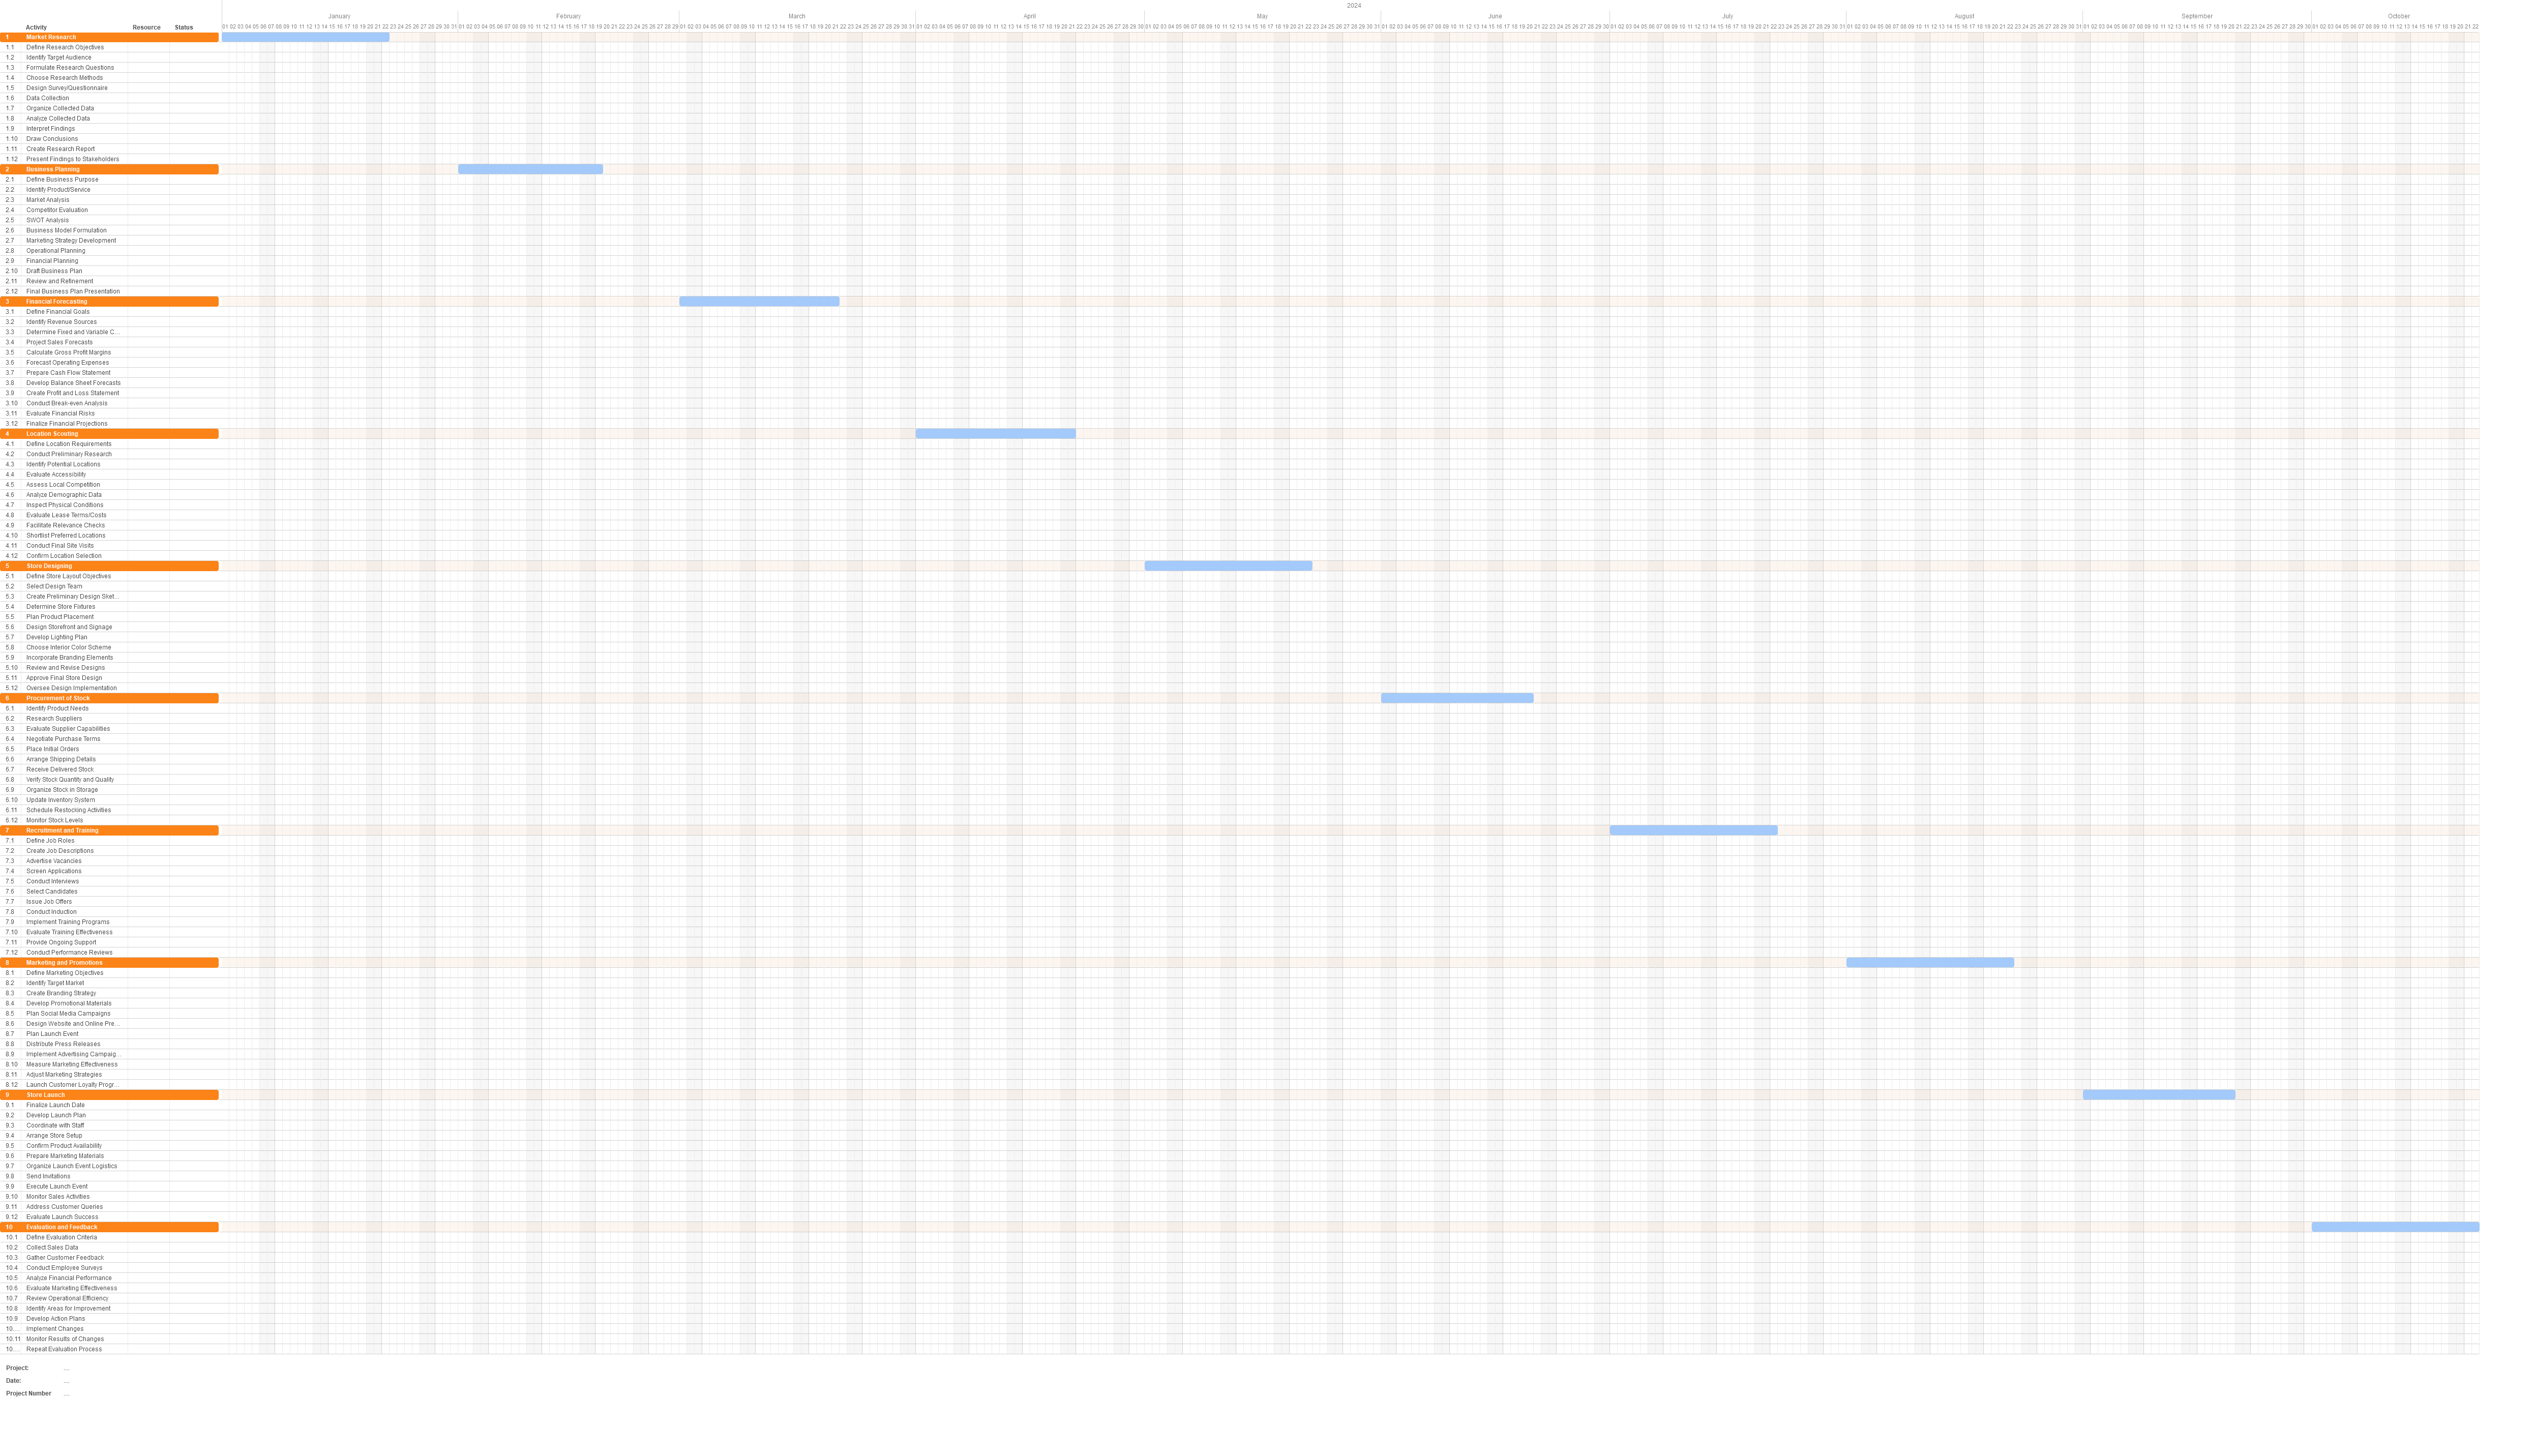 Gantt chart for a Retail Store project